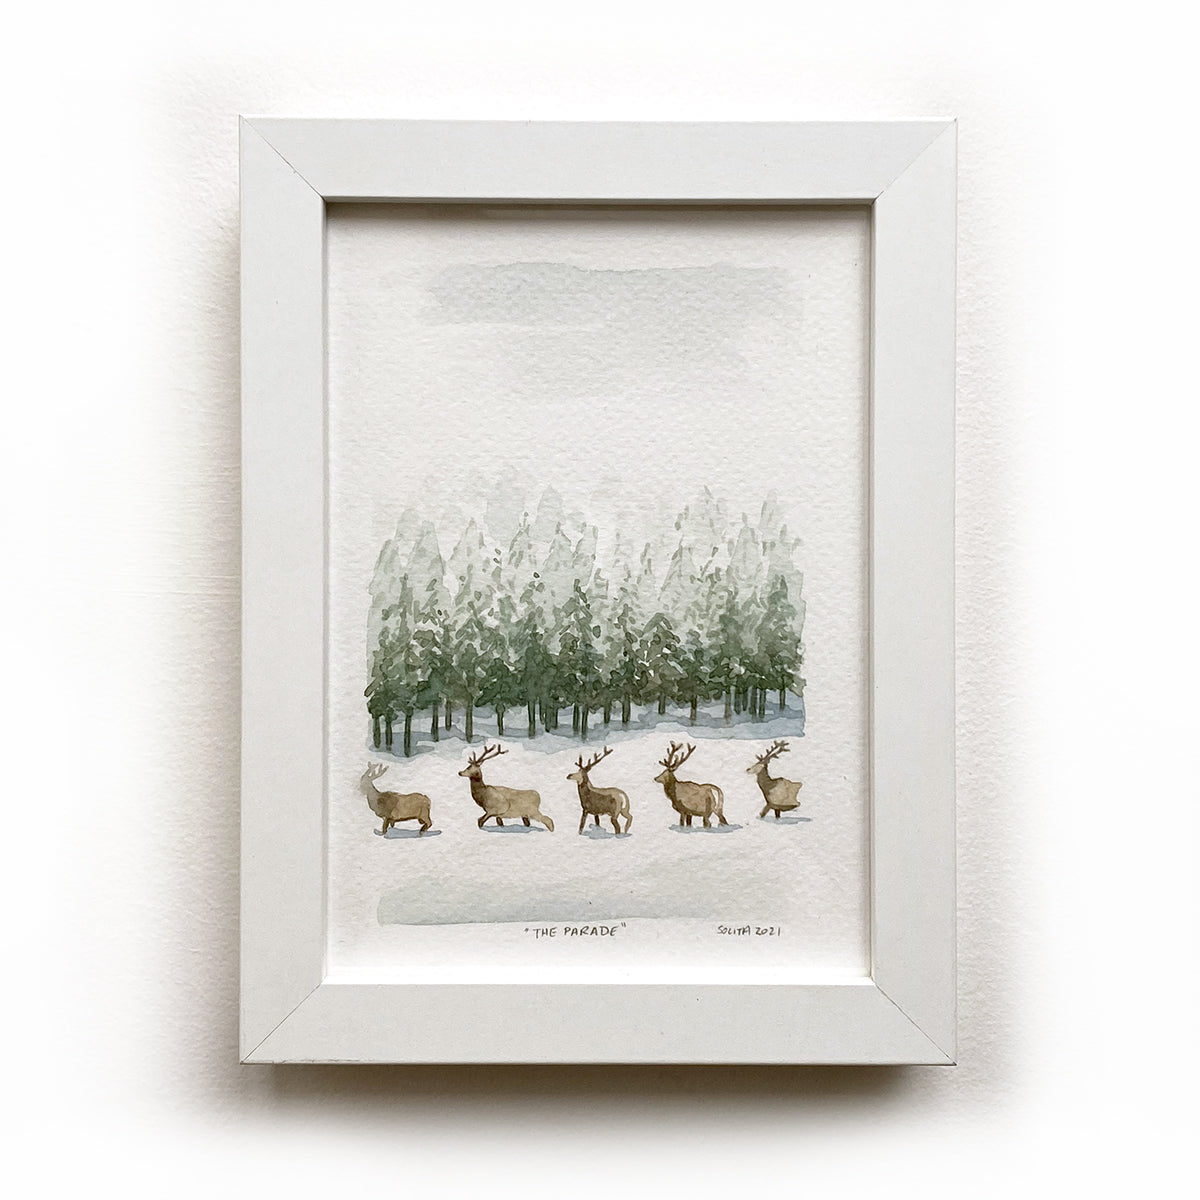 watercolour painting of elk parading through a snowy field